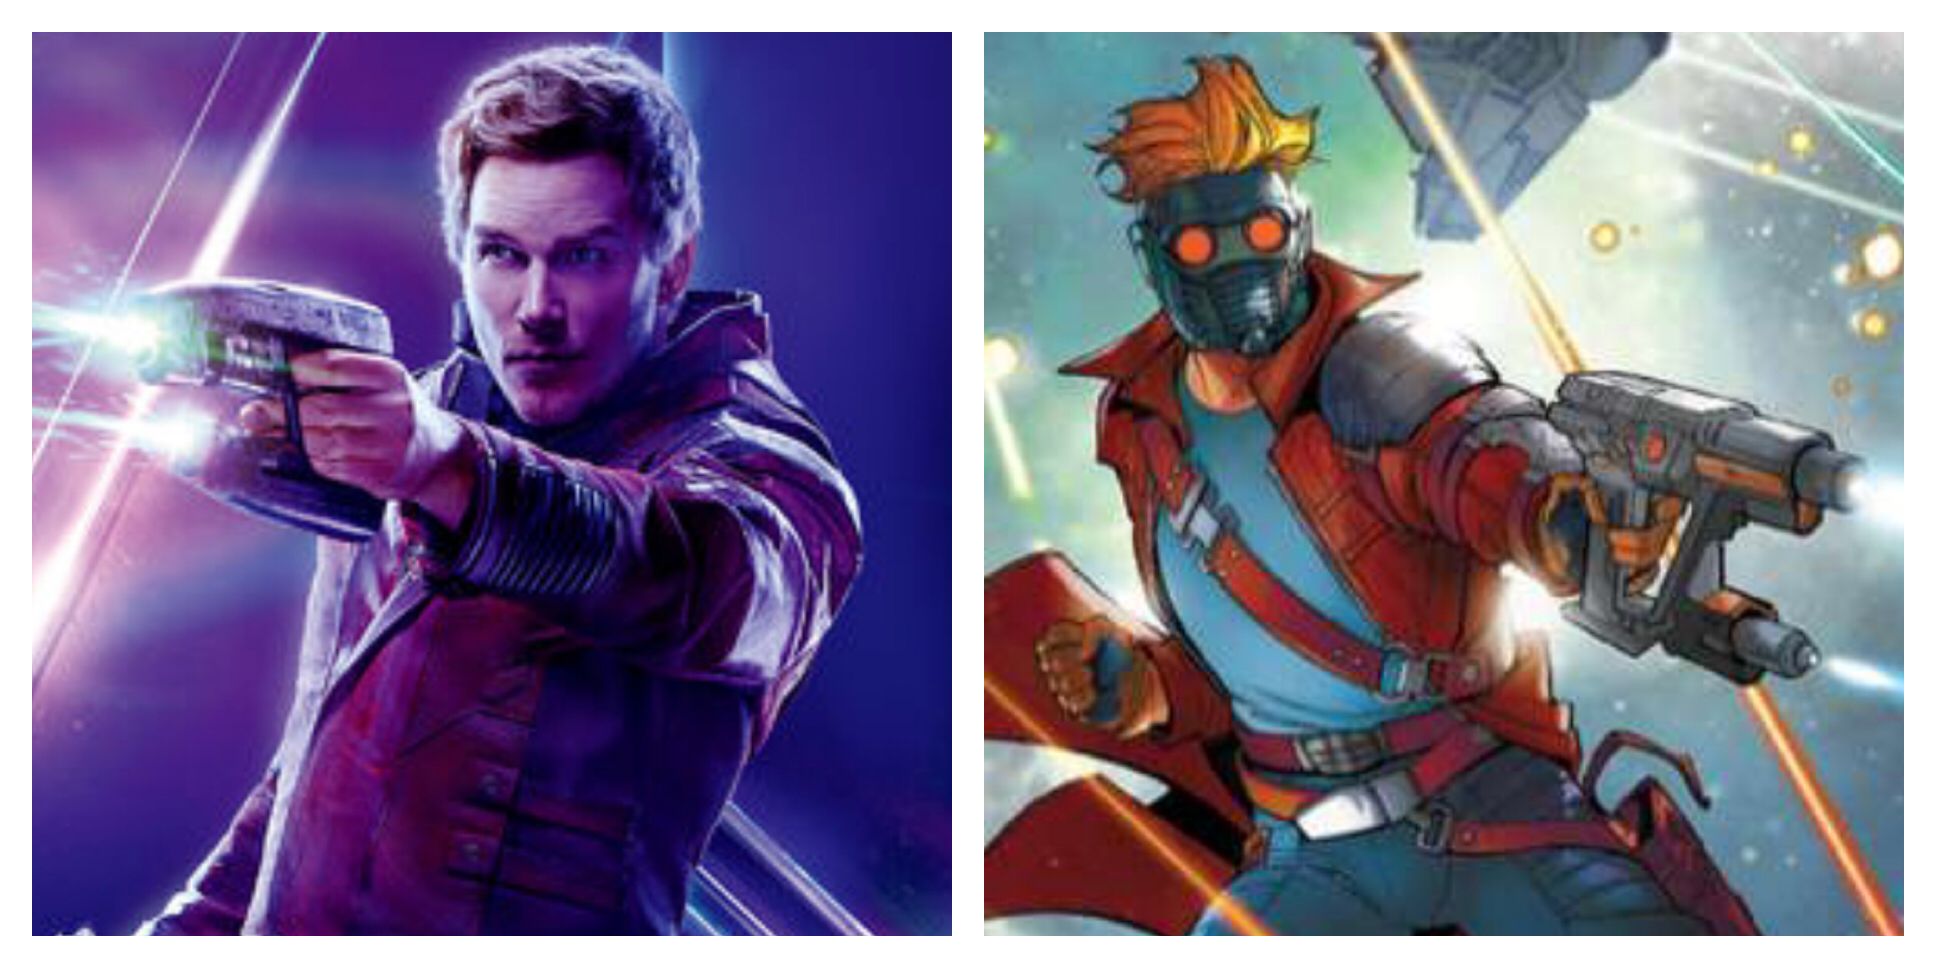 MCU Star-Lord is Stronger Than Comic Book Star-Lord